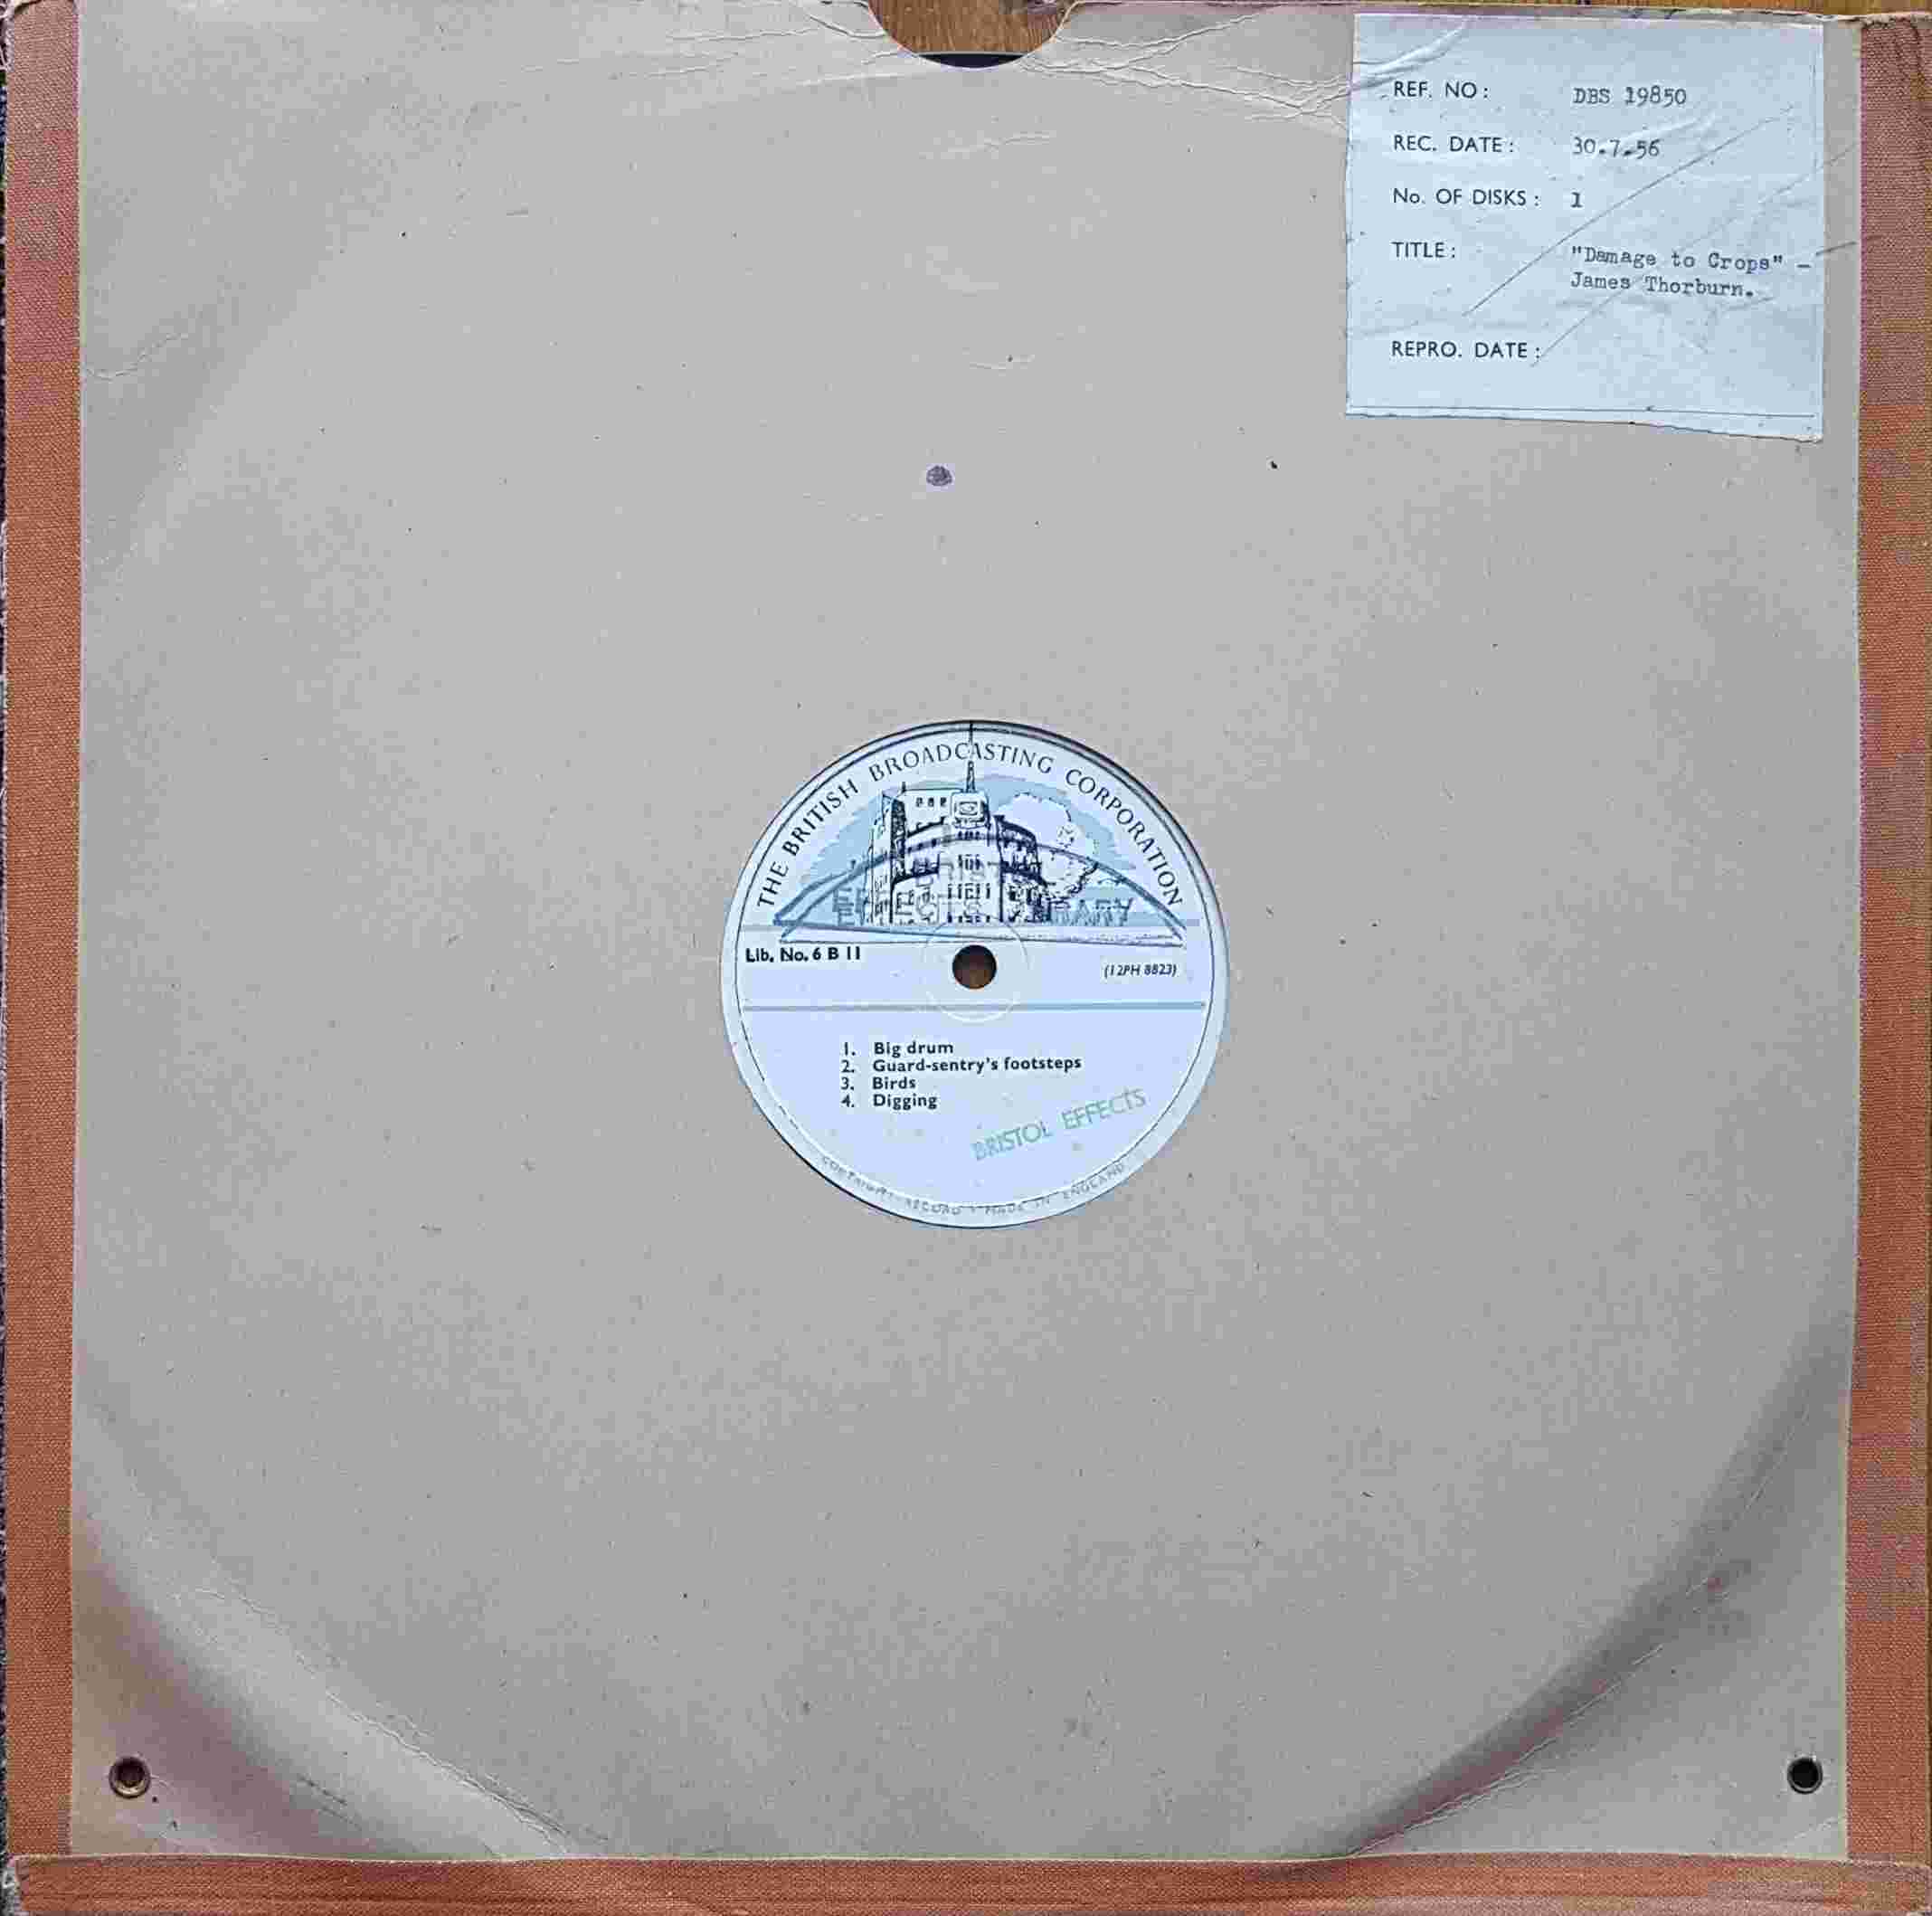 Picture of 6 B 11 Big drum by artist Not registered from the BBC 78 - Records and Tapes library